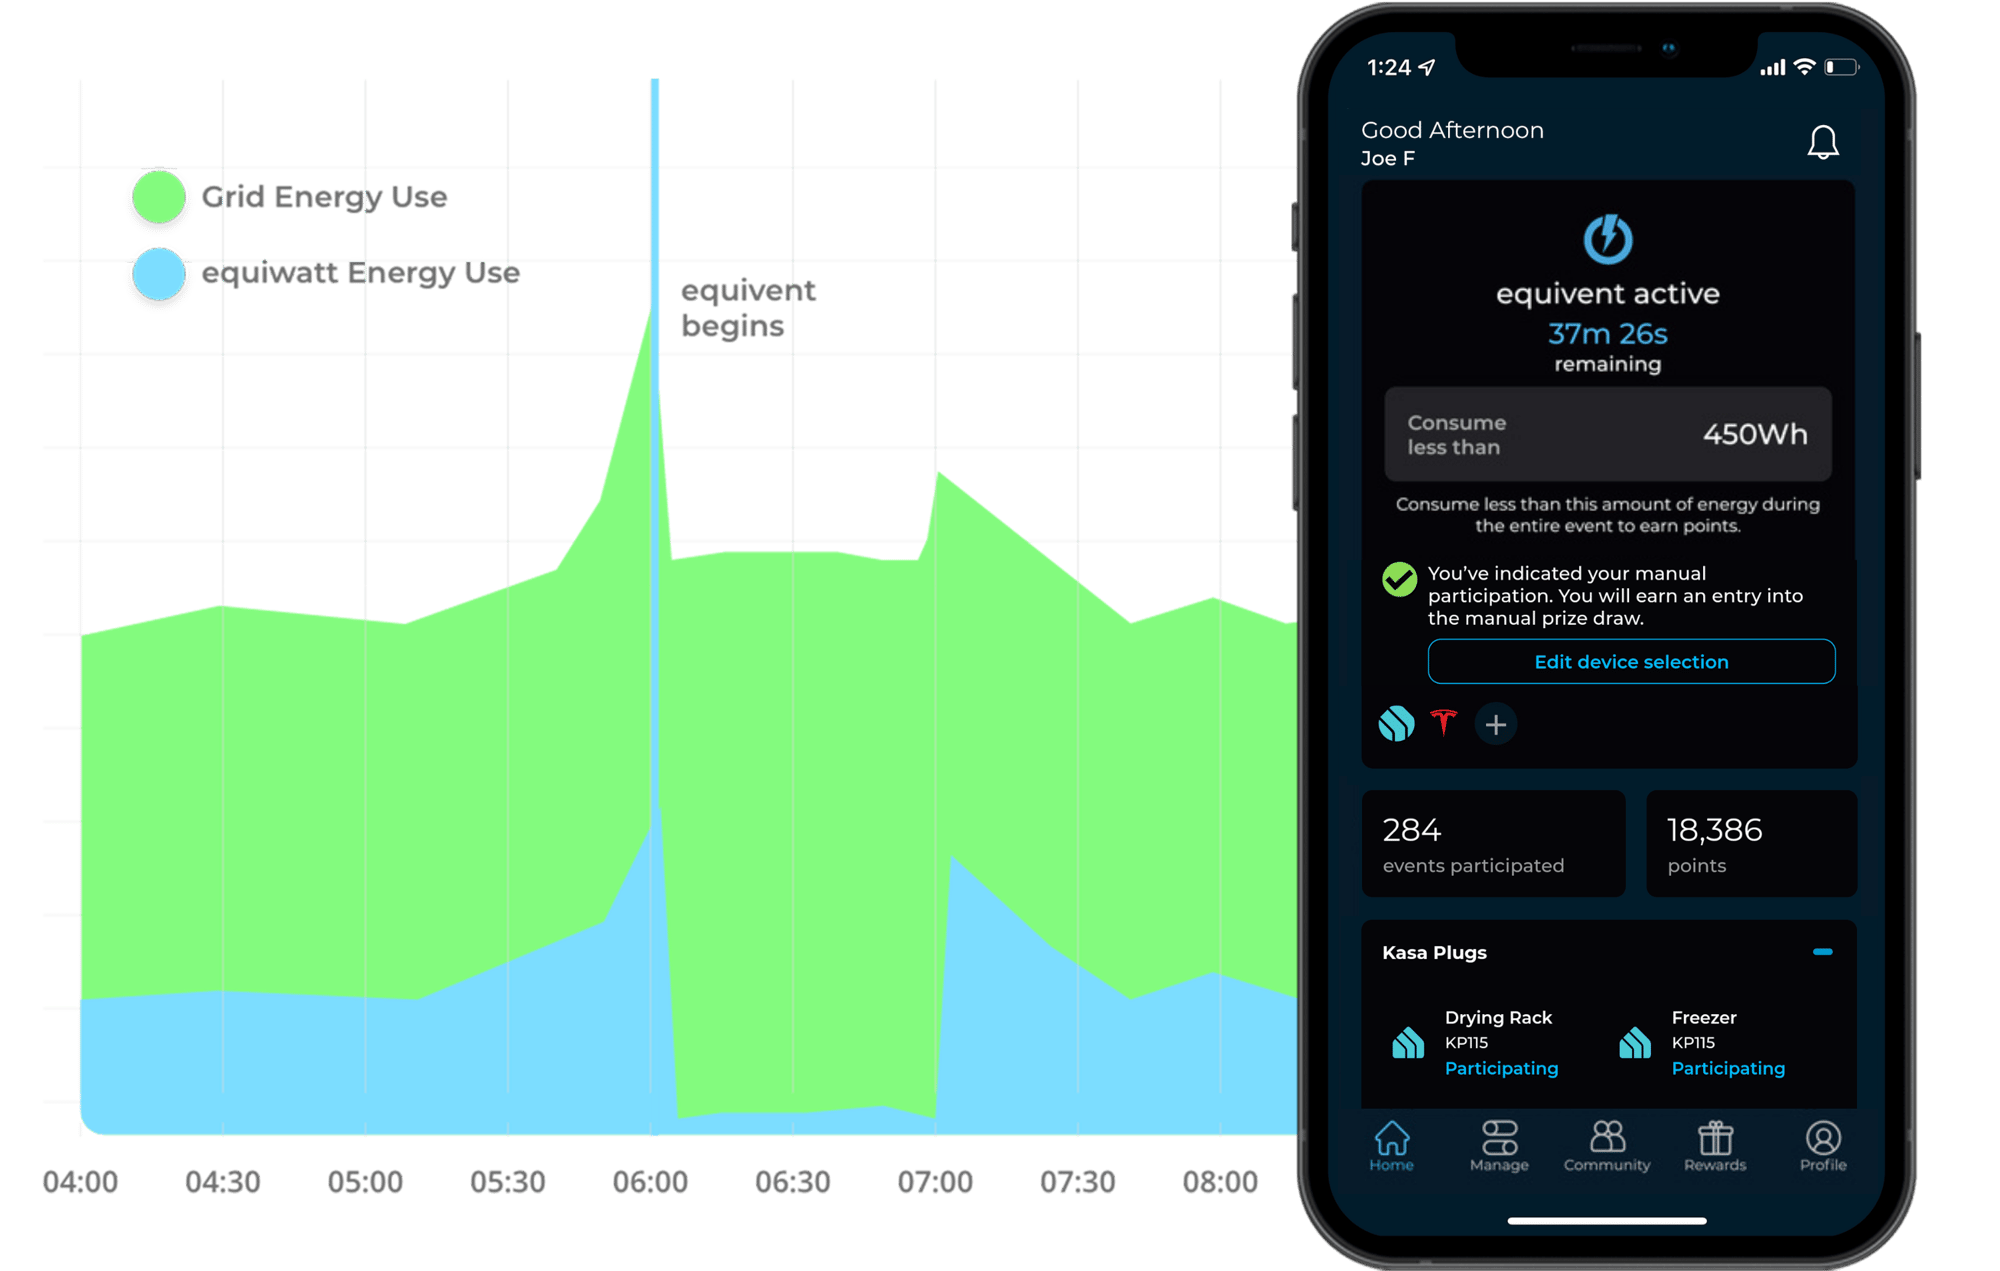 equiwatt app and graph during an equivent